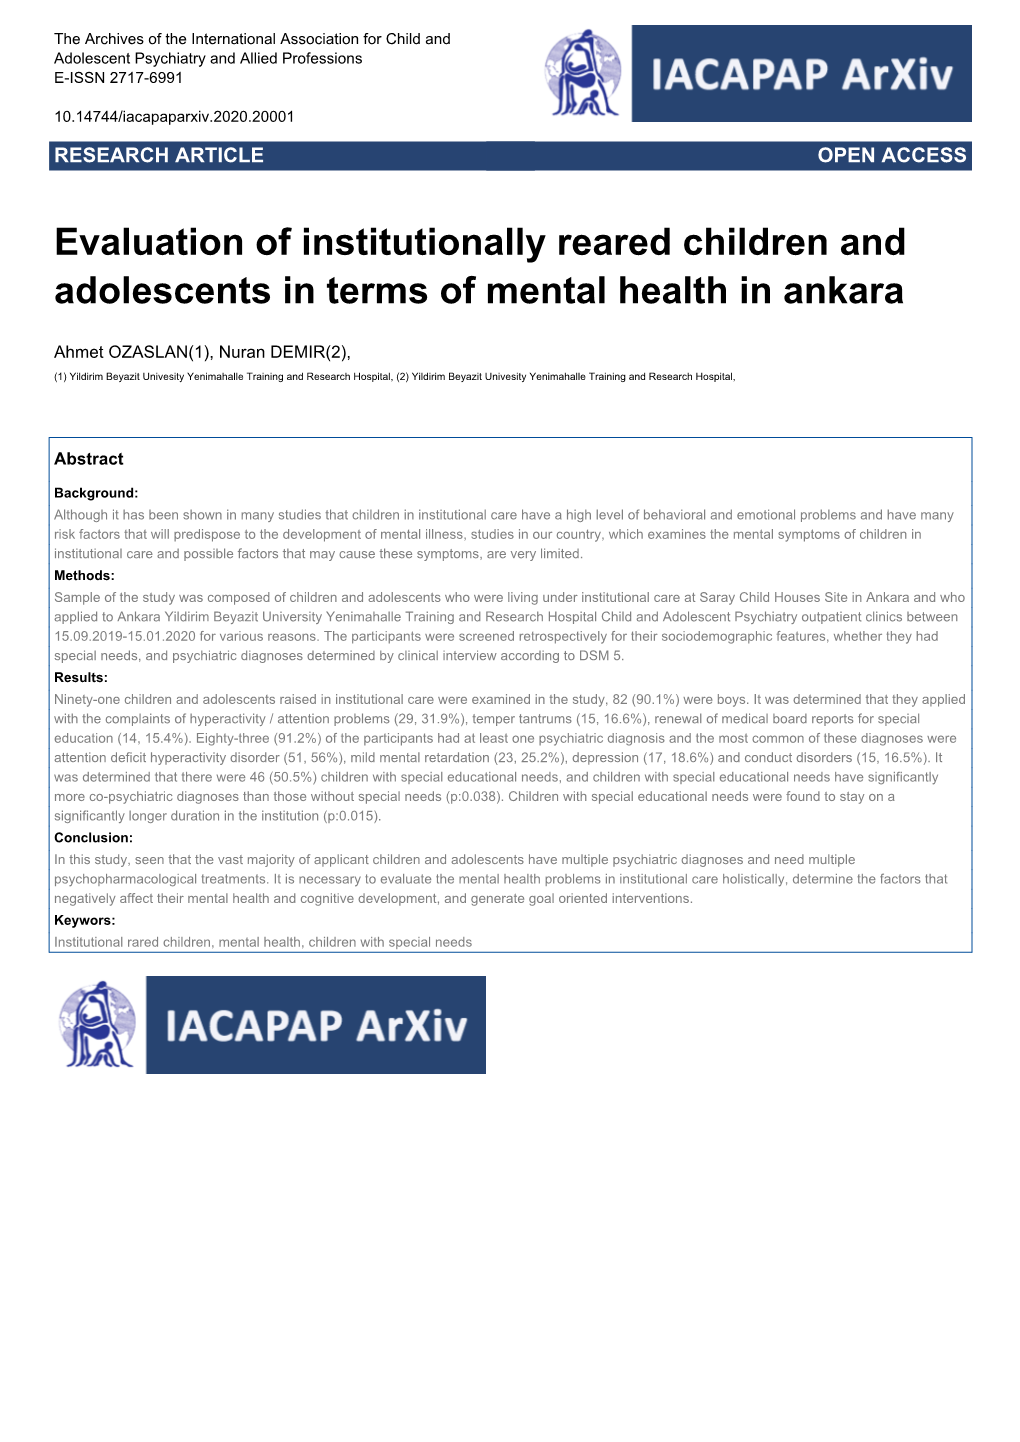 Evaluation of Institutionally Reared Children and Adolescents in Terms of Mental Health in Ankara